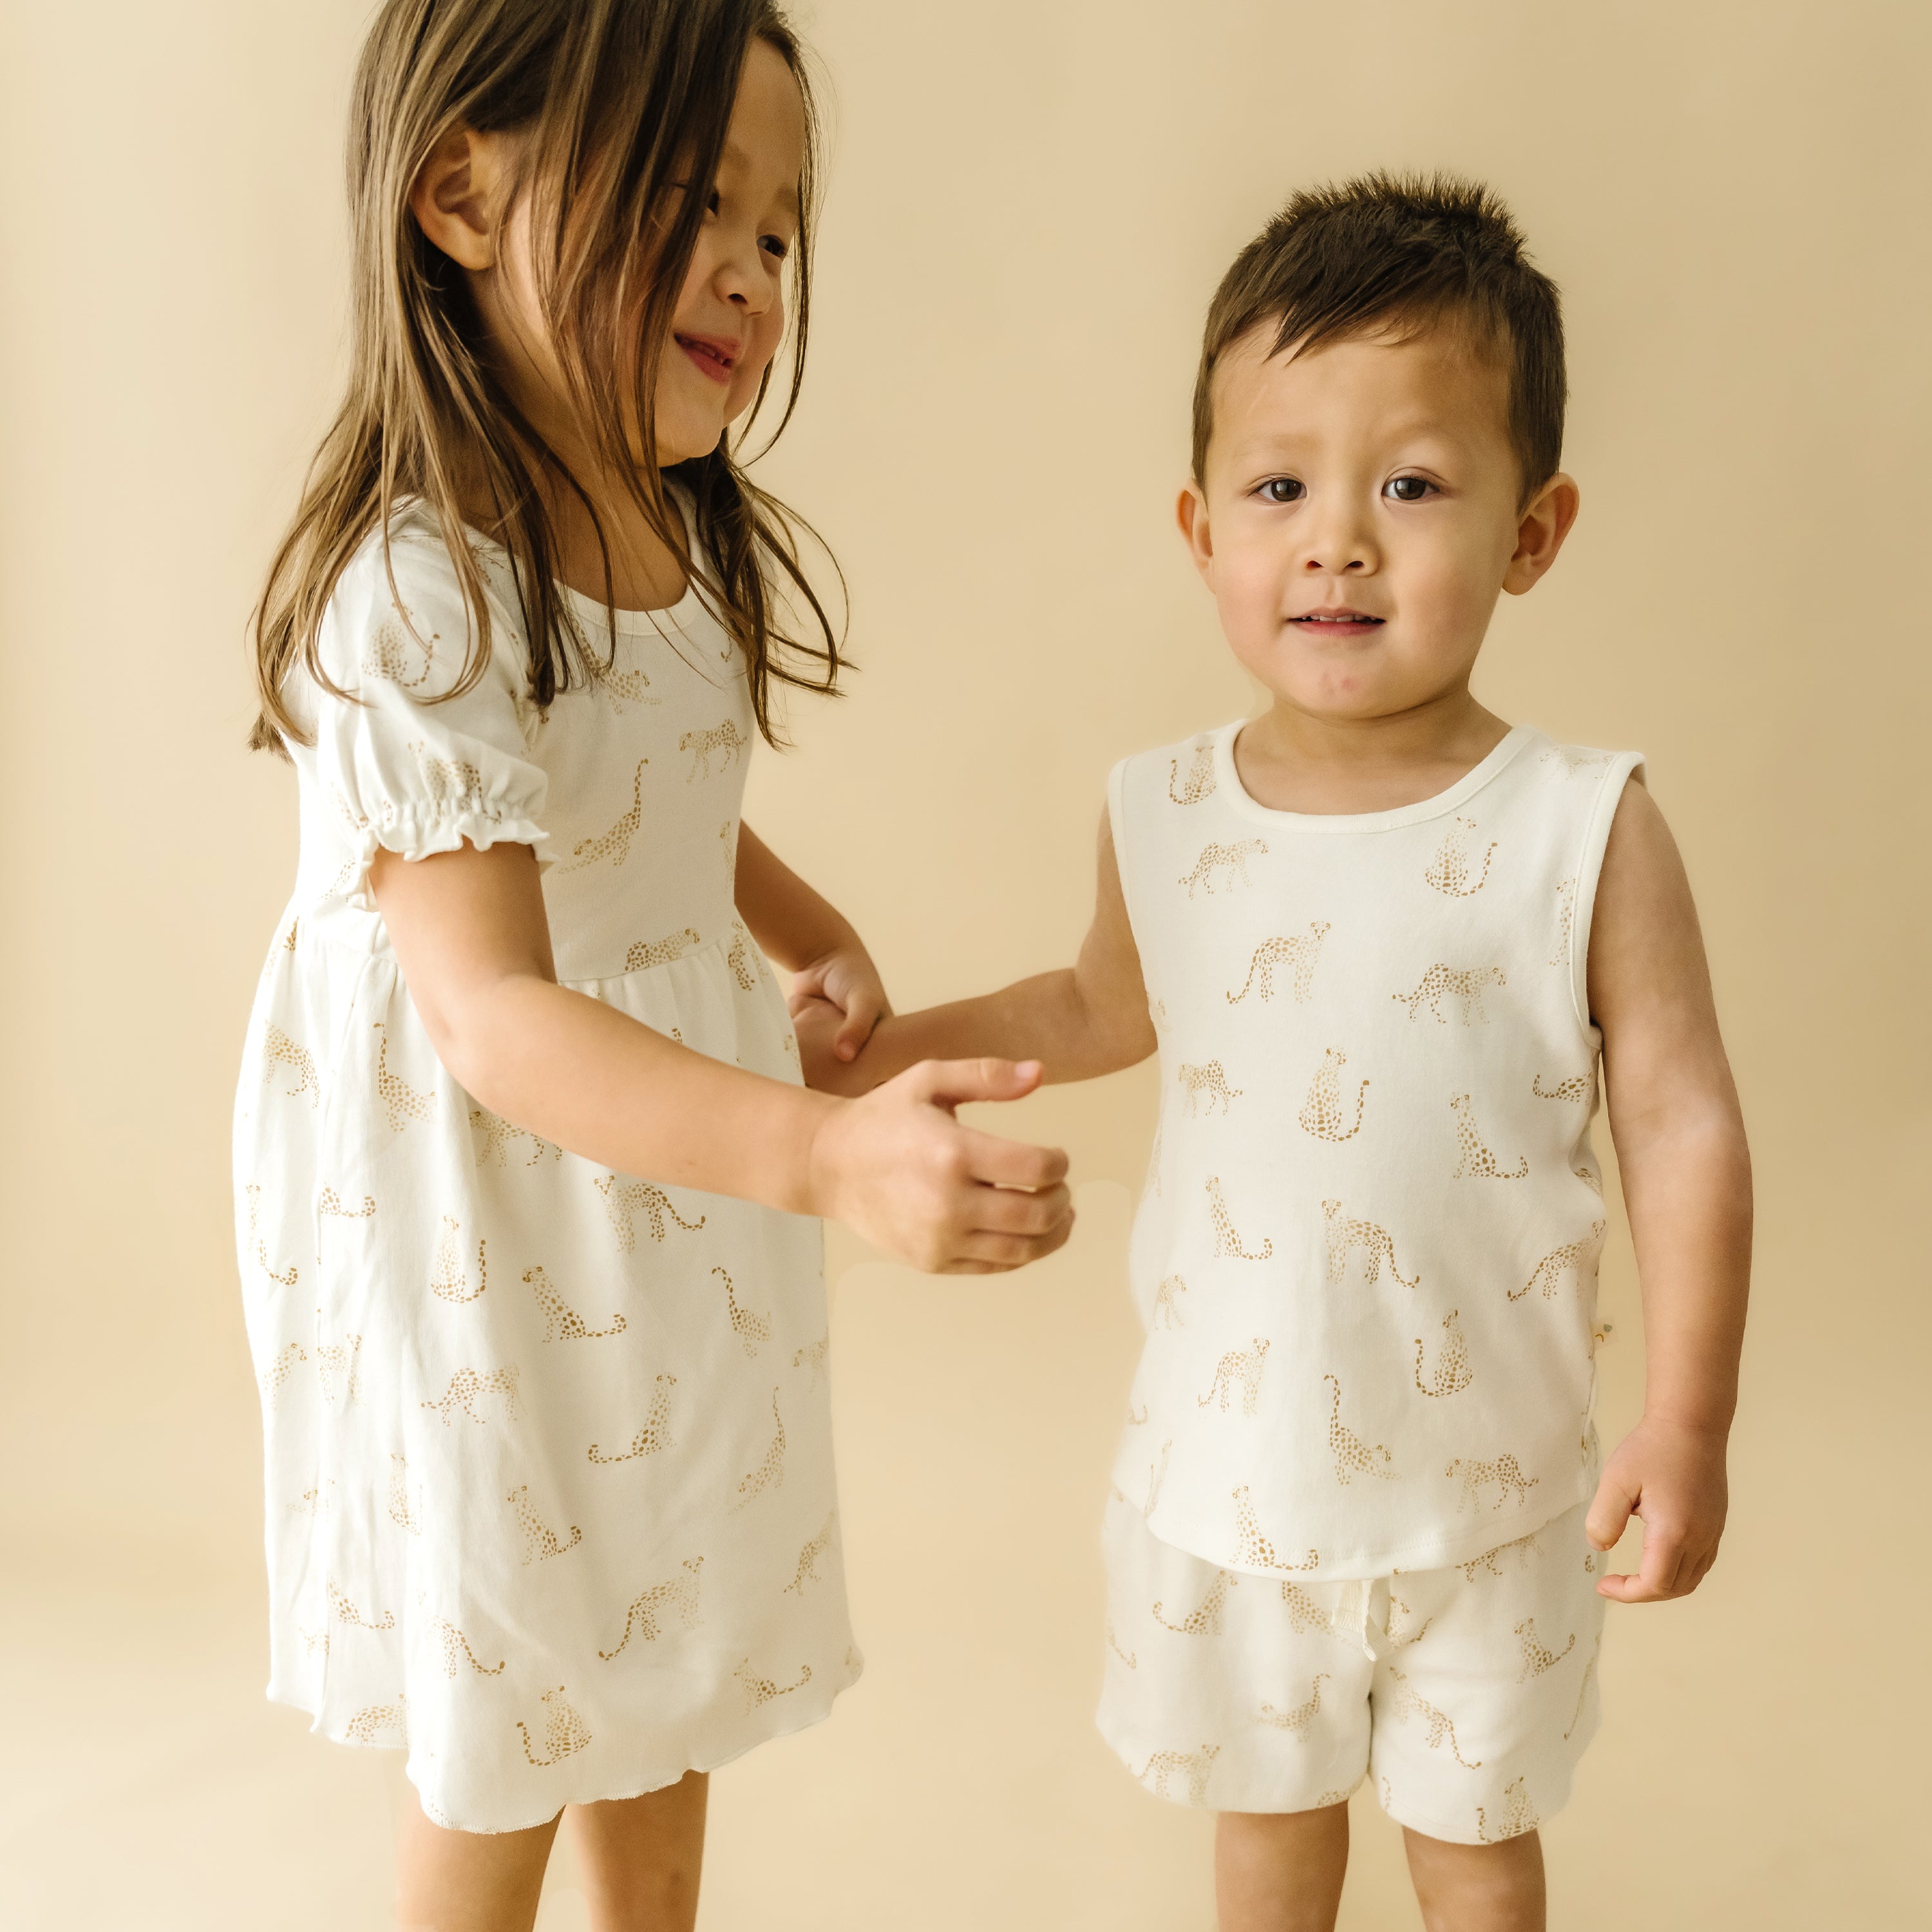 Two young children, a girl in a white dress and a boy in a matching white outfit with giraffe prints from Organic Kids, are holding hands and smiling in front of a beige background.